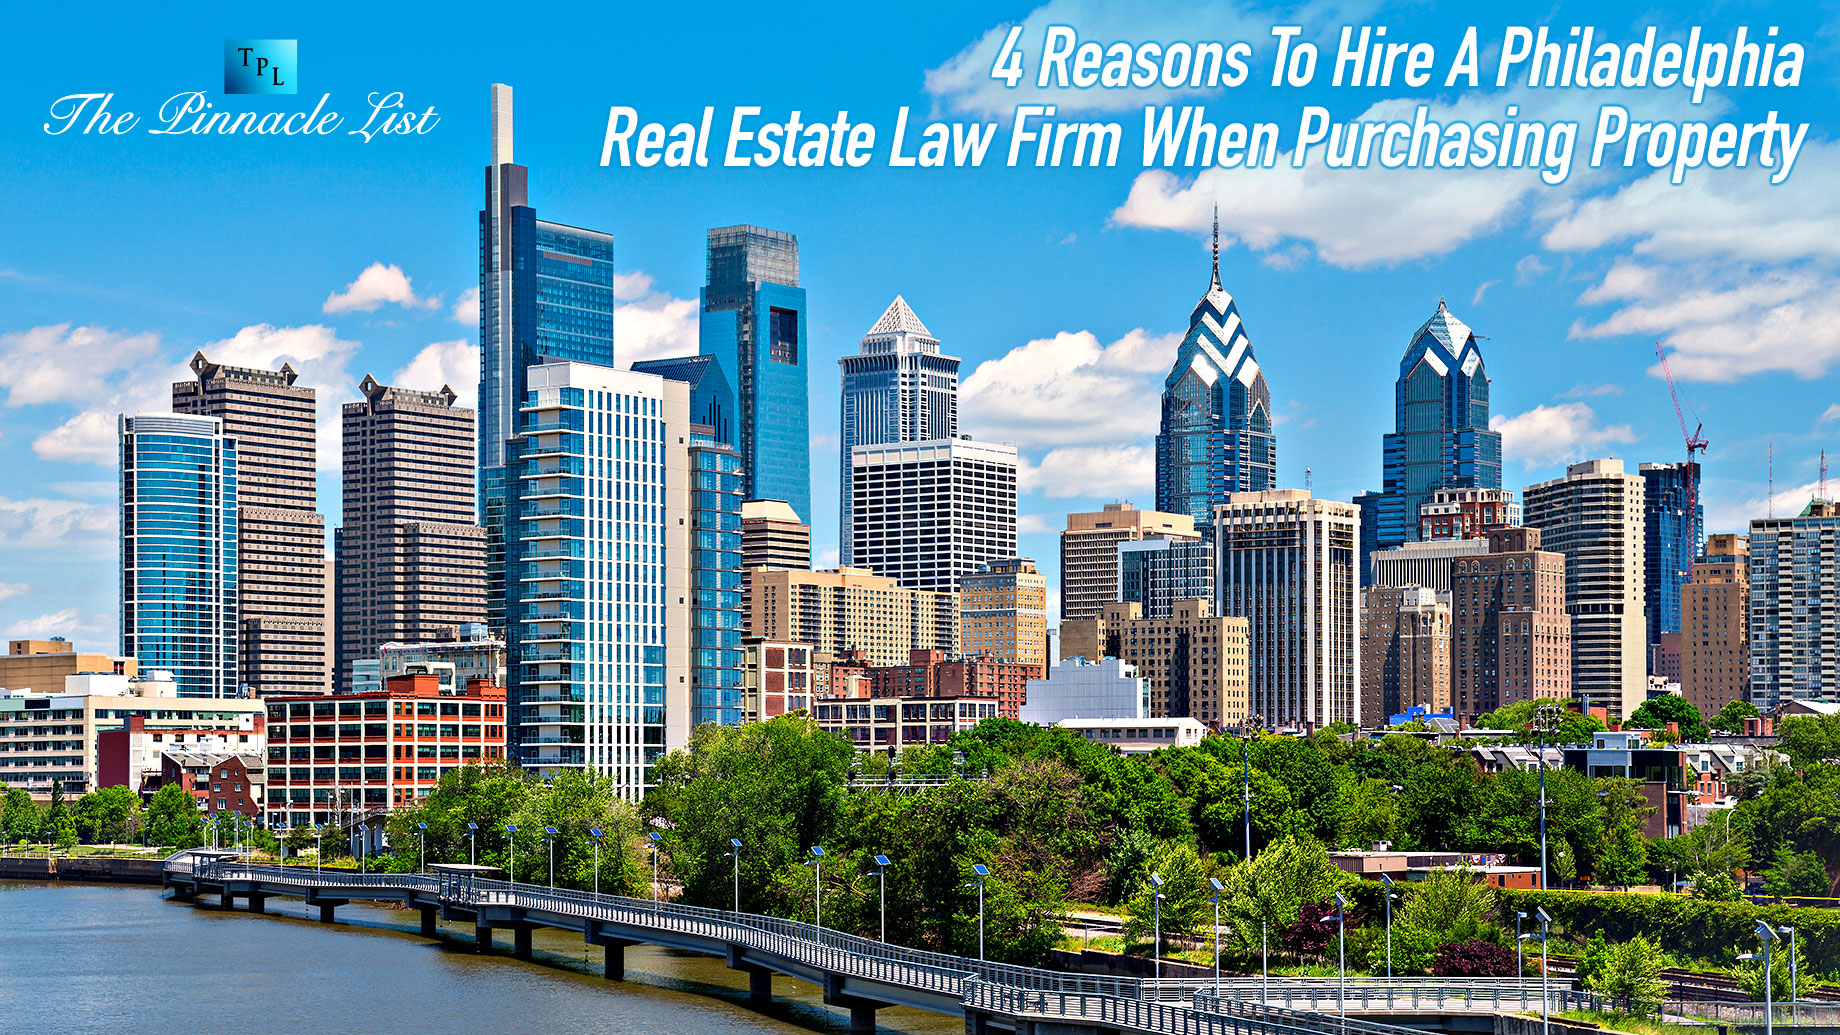 4 Reasons To Hire A Philadelphia Real Estate Law Firm When Purchasing Property